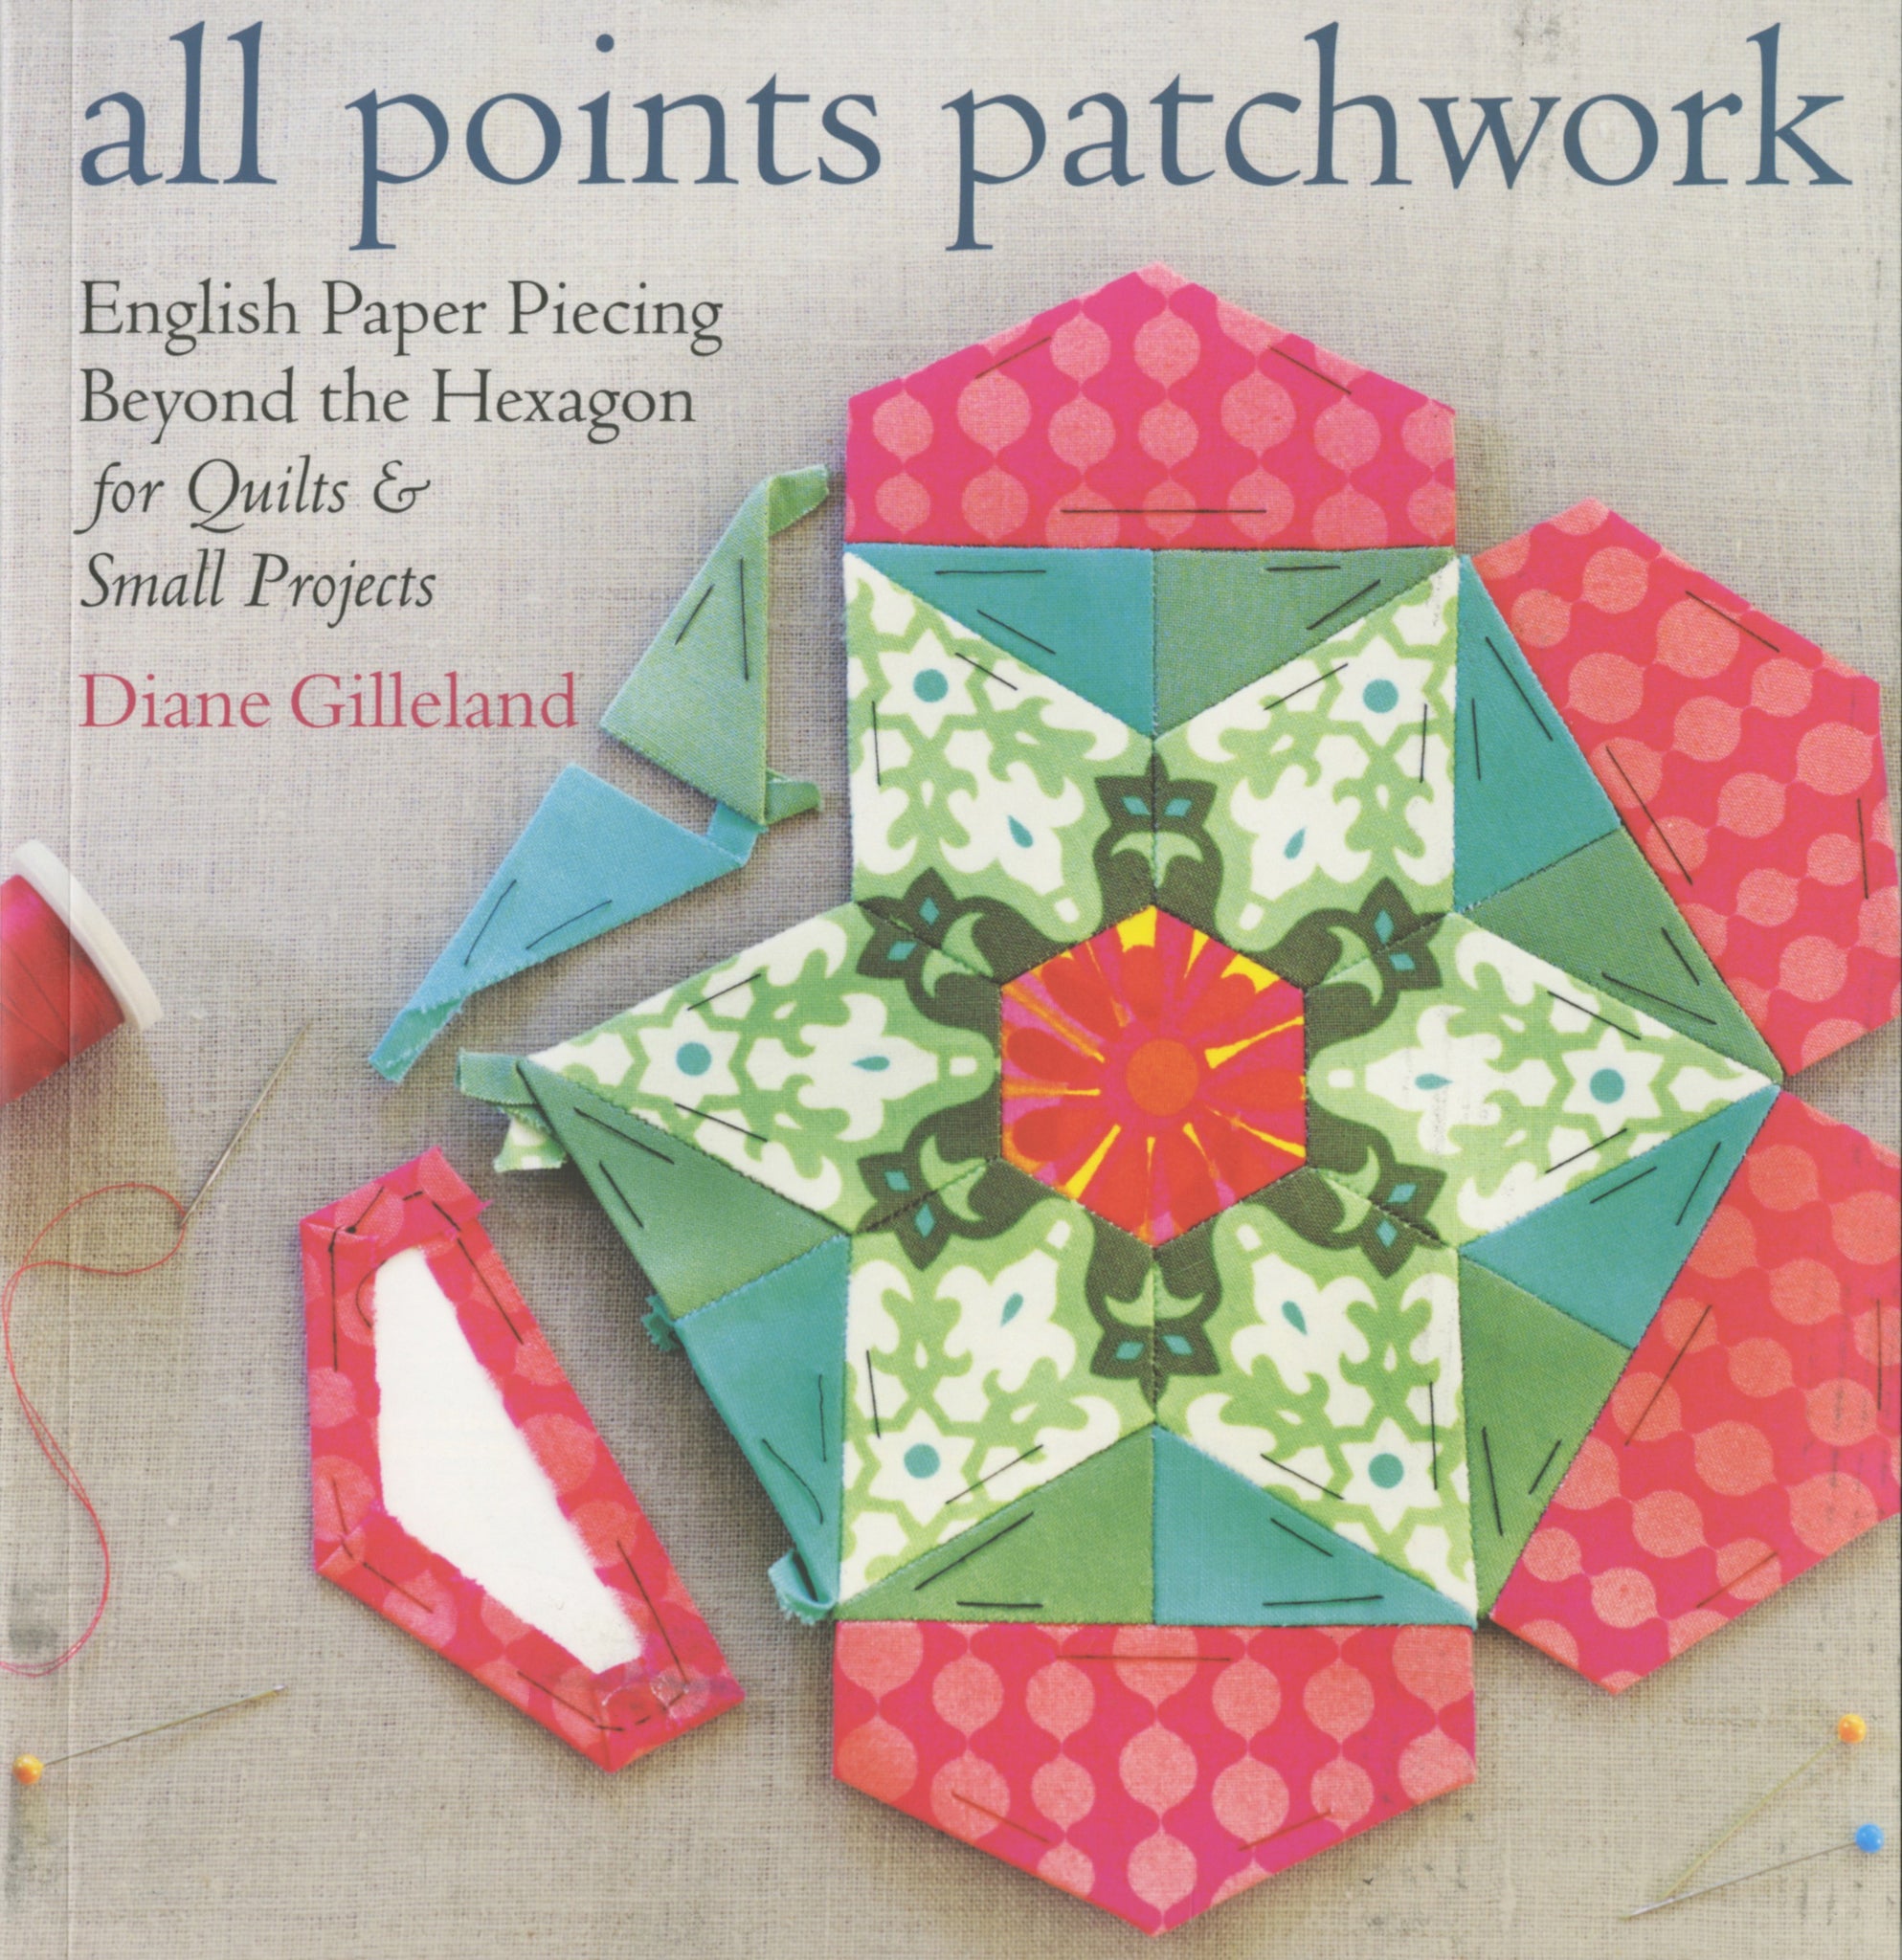 All Points Patchwork Project Excerpt: Making Templates for English